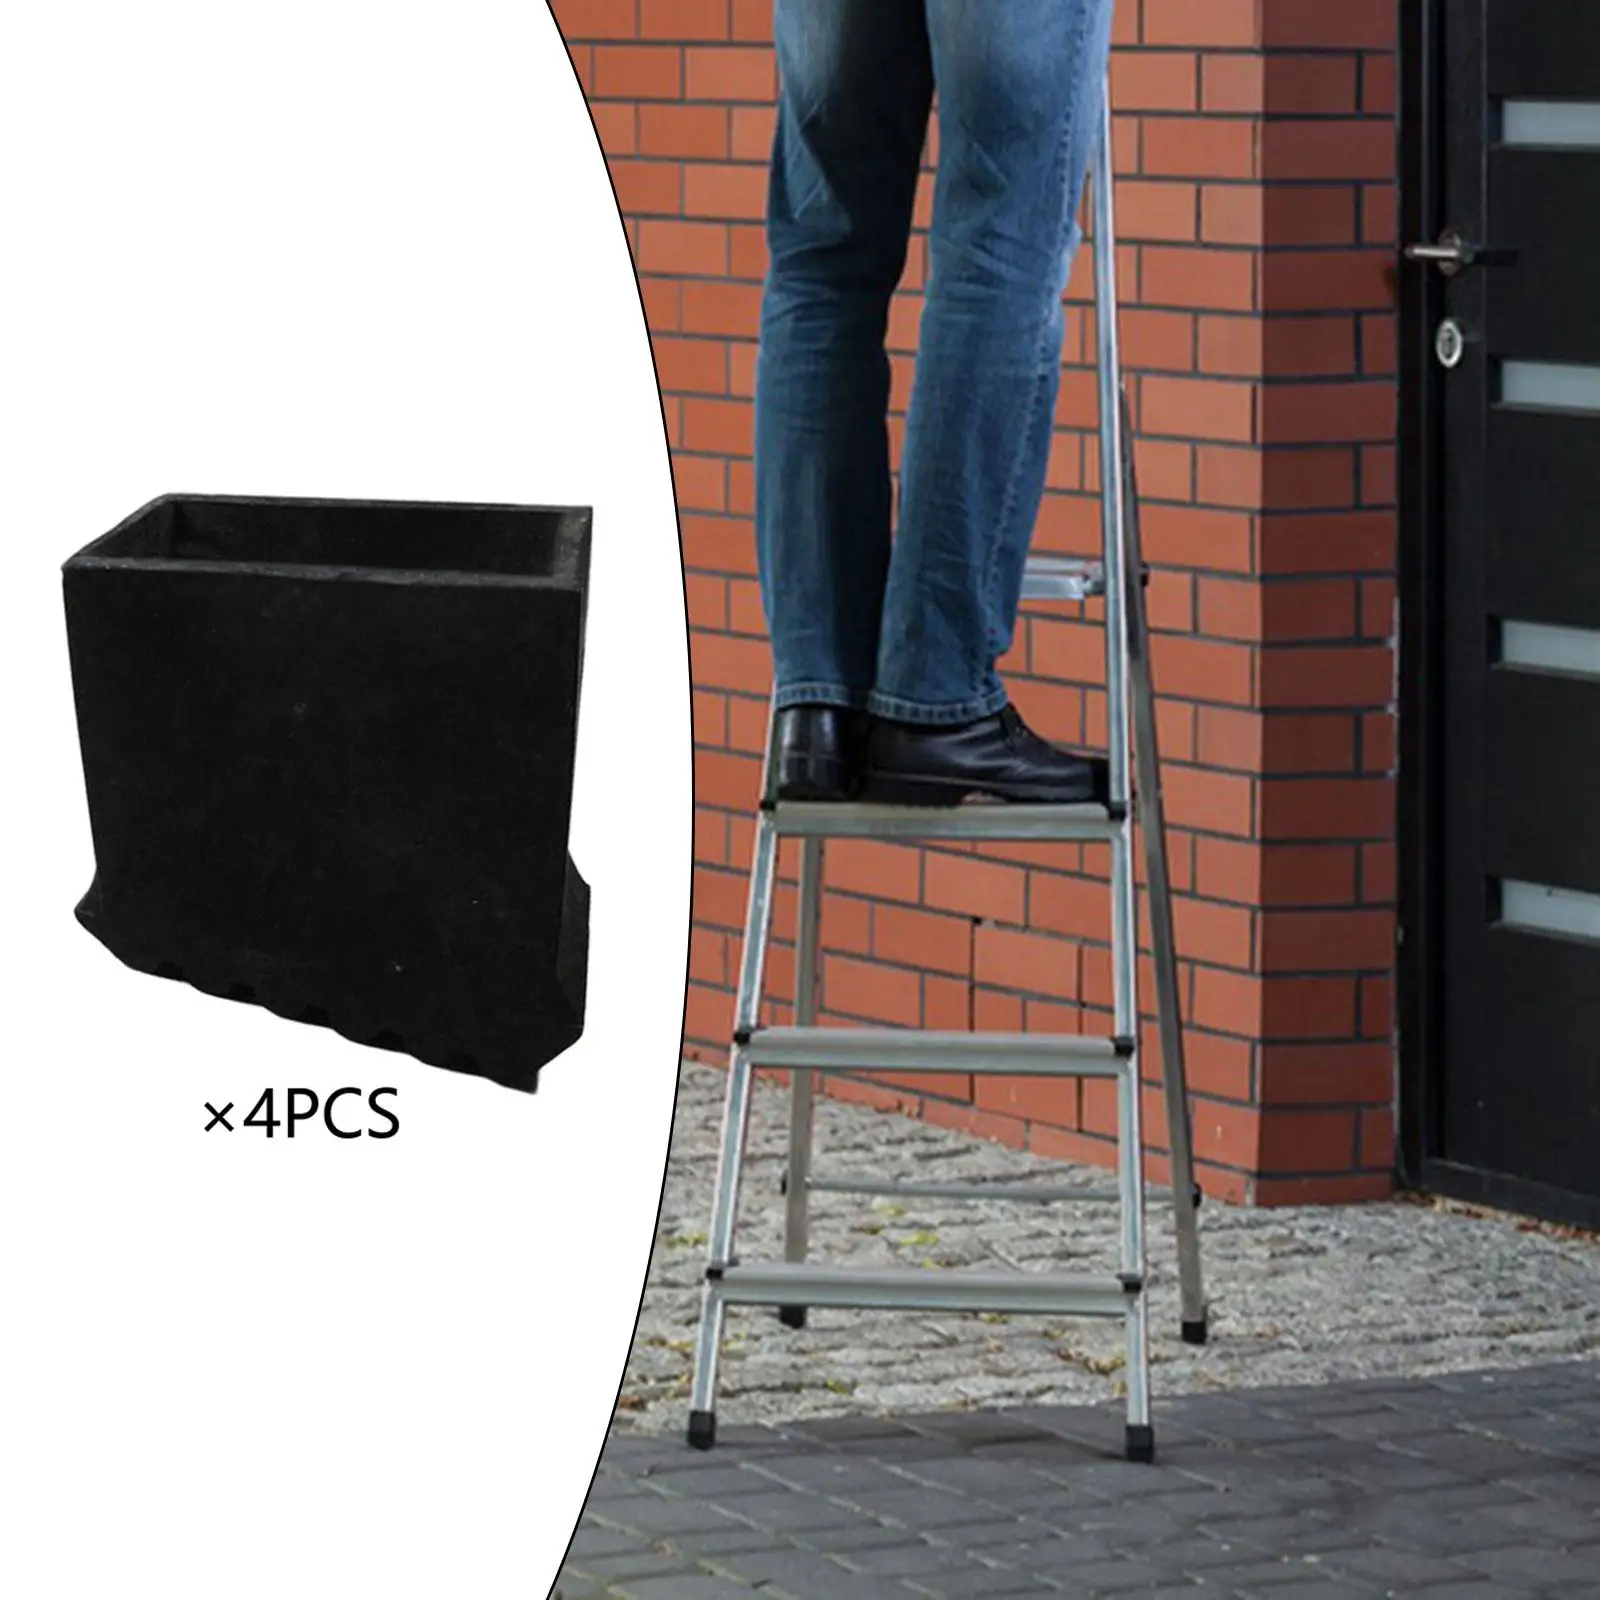 4x Rubber Steep Ladder Foot Pads Convenient Extension Ladder Acccessoires Protects Floors Wear Resistance Ladder Covers